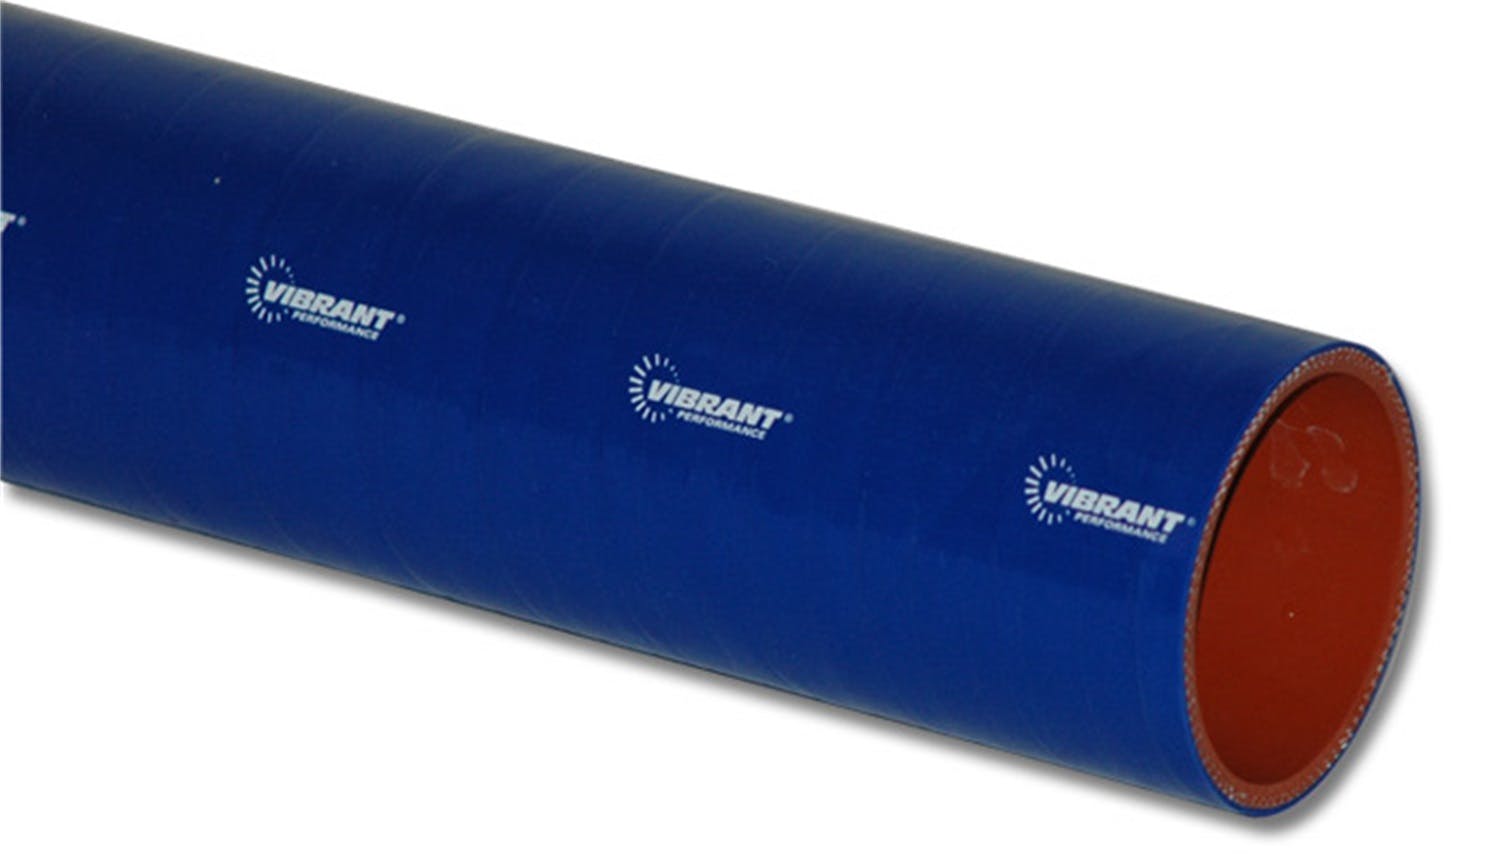 Vibrant Performance 27031B 4 Ply Silicone Sleeve, 1.5 inch I.D. x 12 inch Long - Blue